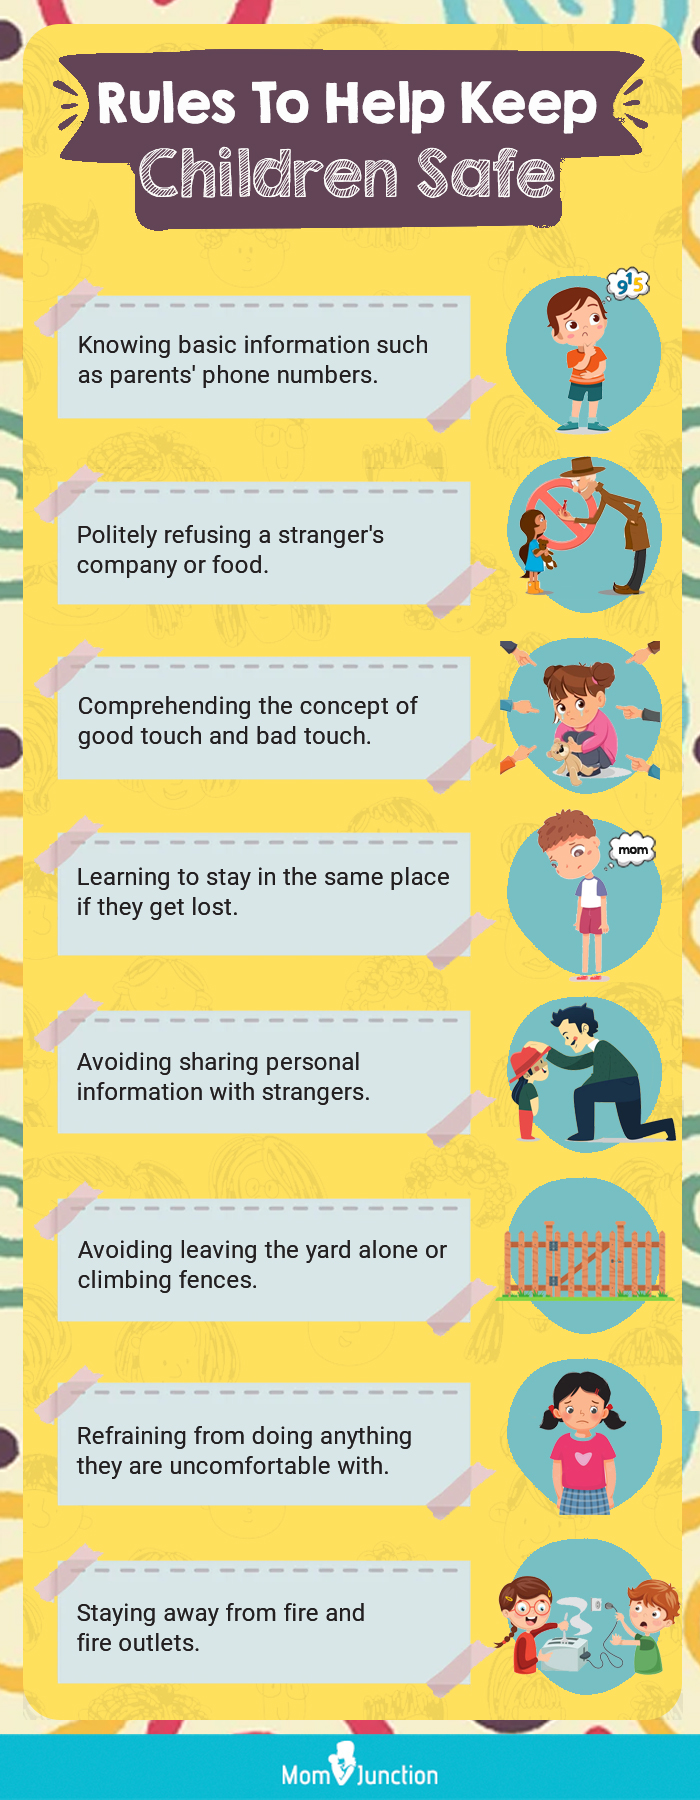 rules to help keep children safe (infographic)